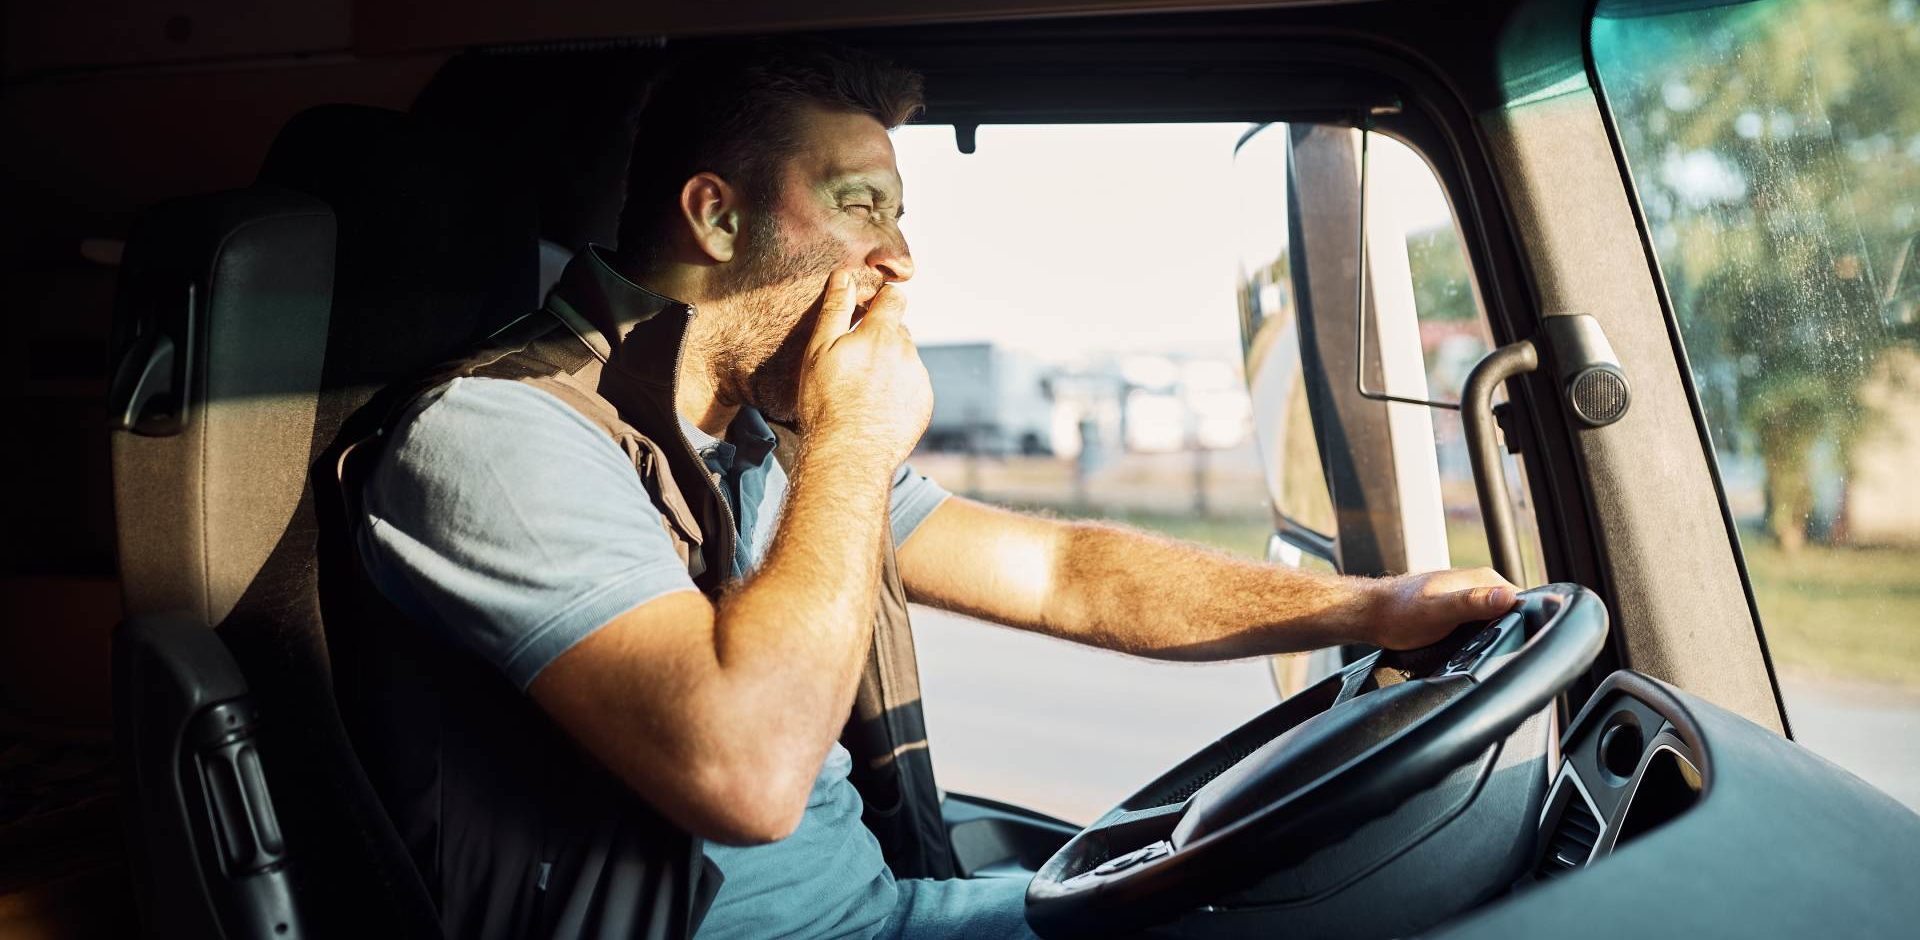 Truck Driver Fatigue: What Are Your Options After an Accident?